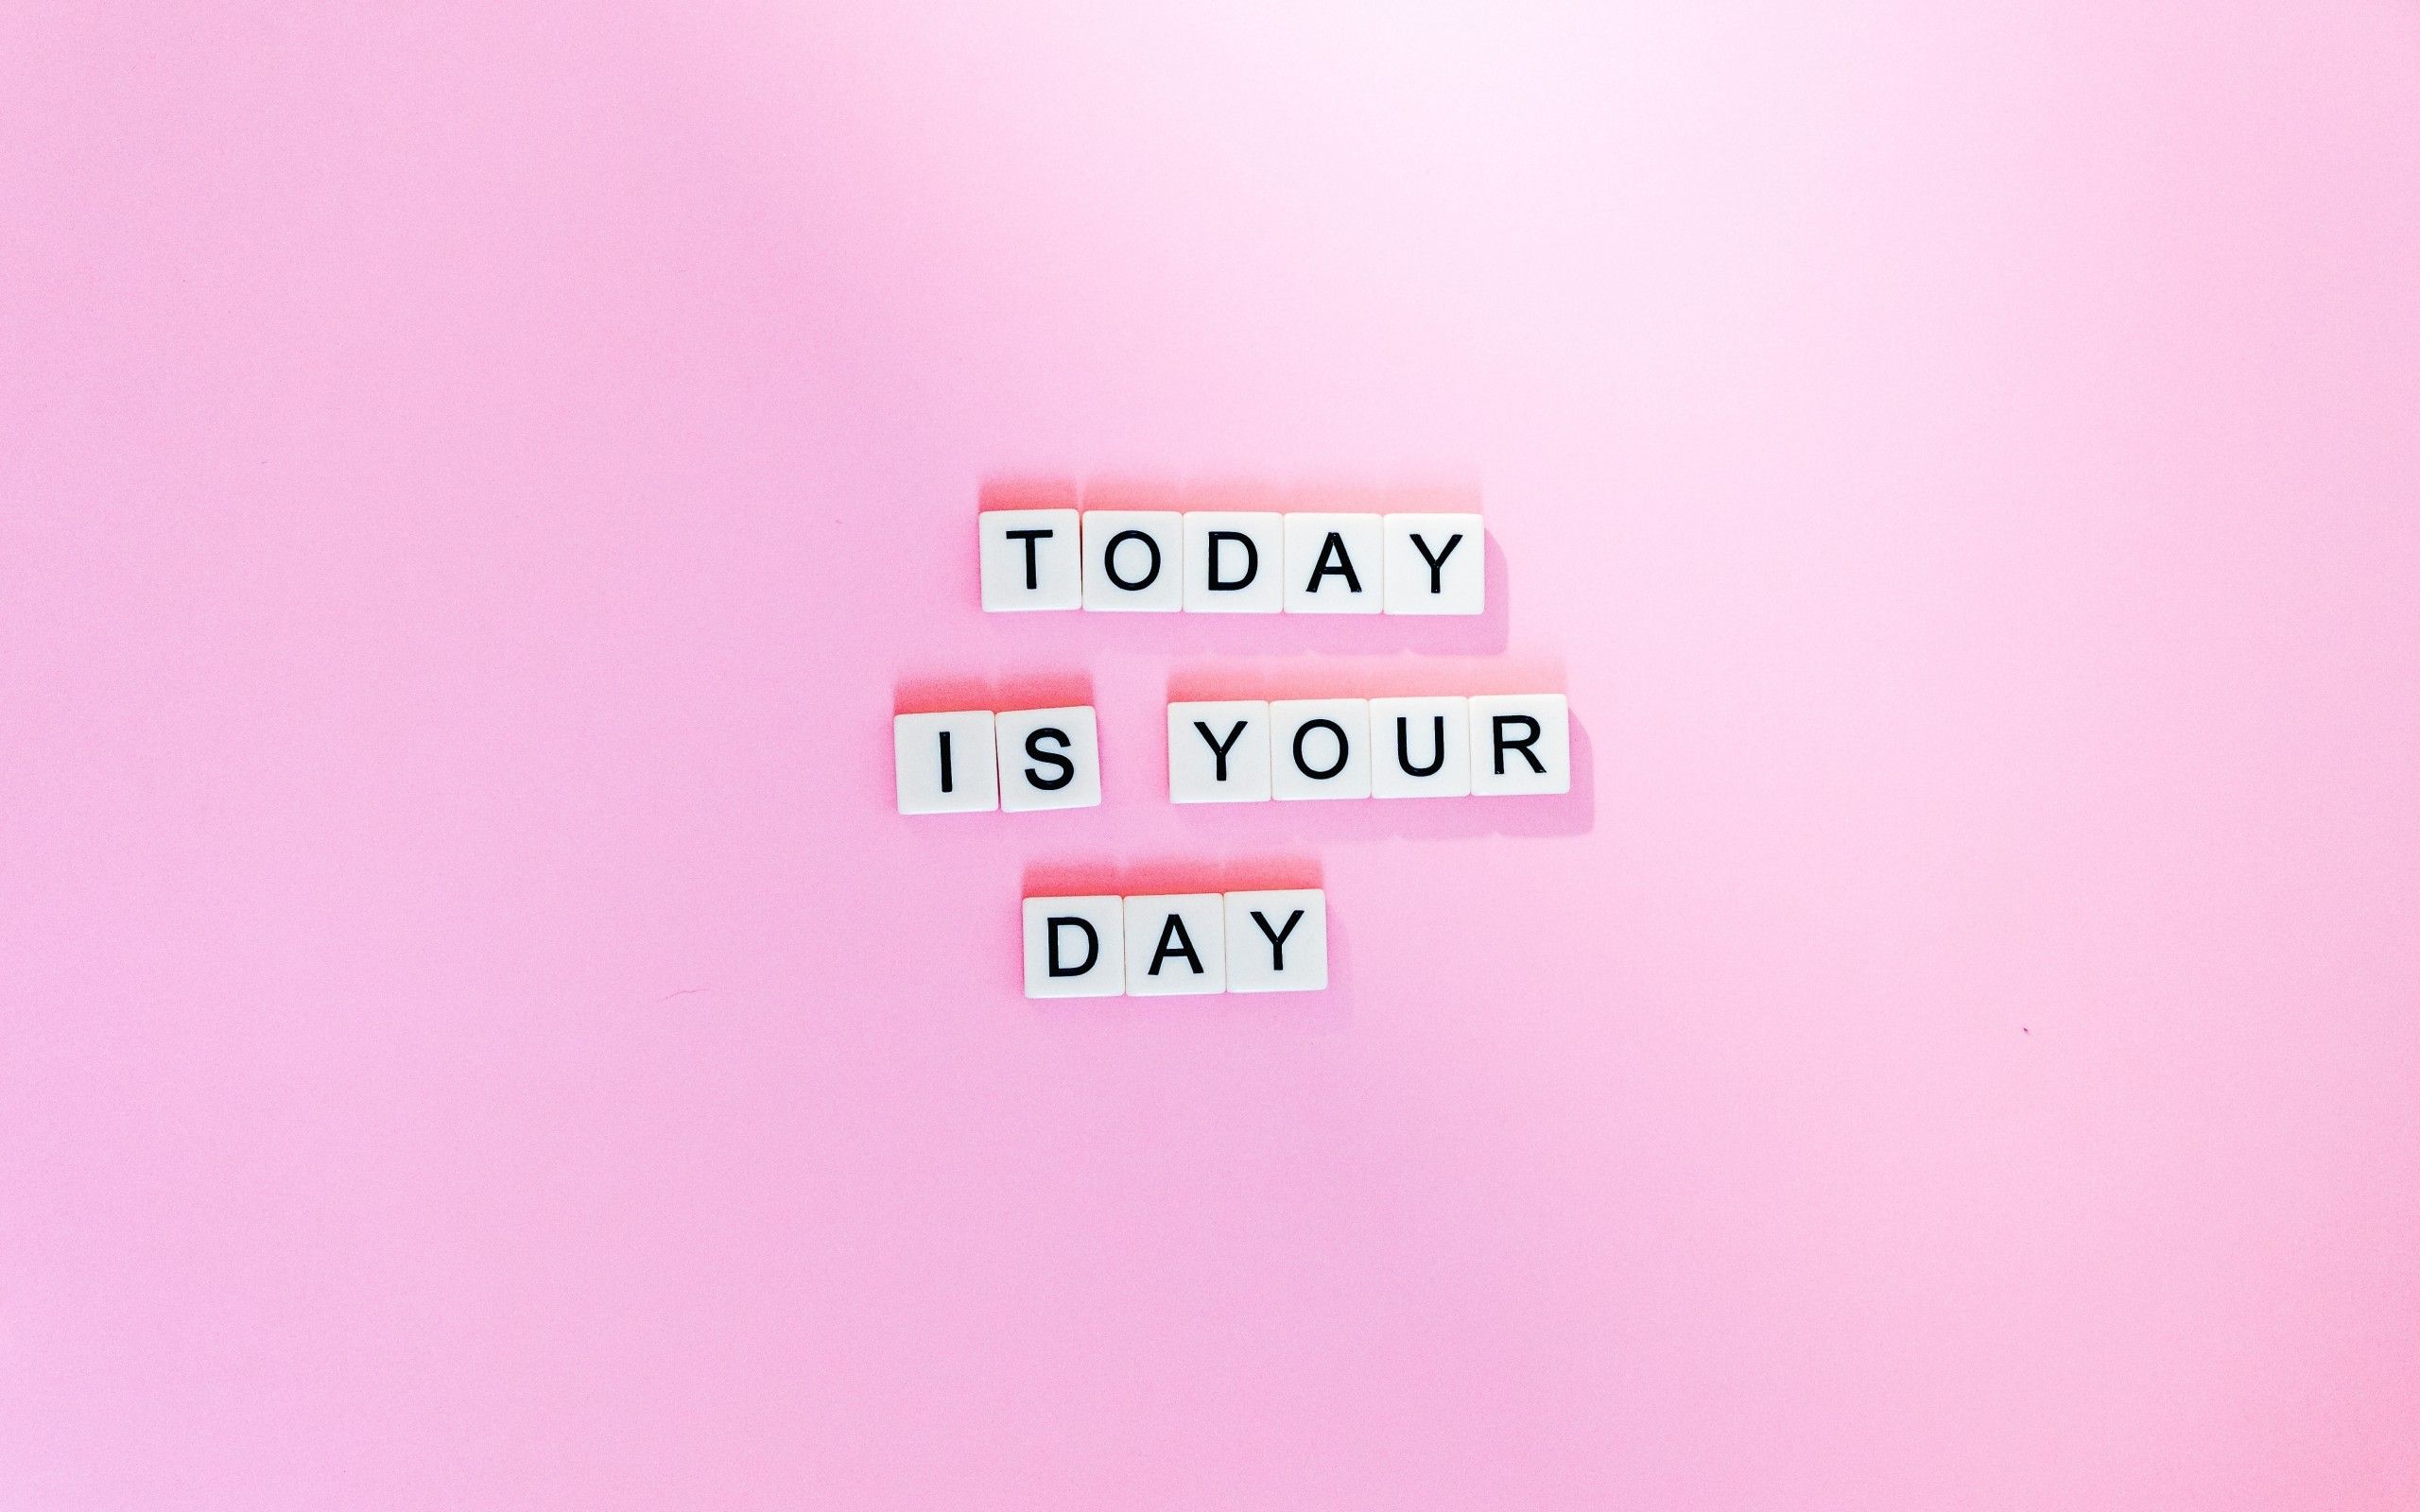 Download 2560x1600 Today Is Your Day, Motivational Quotes, Pink Background, Words Wallpaper for MacBook Pro 13 inch